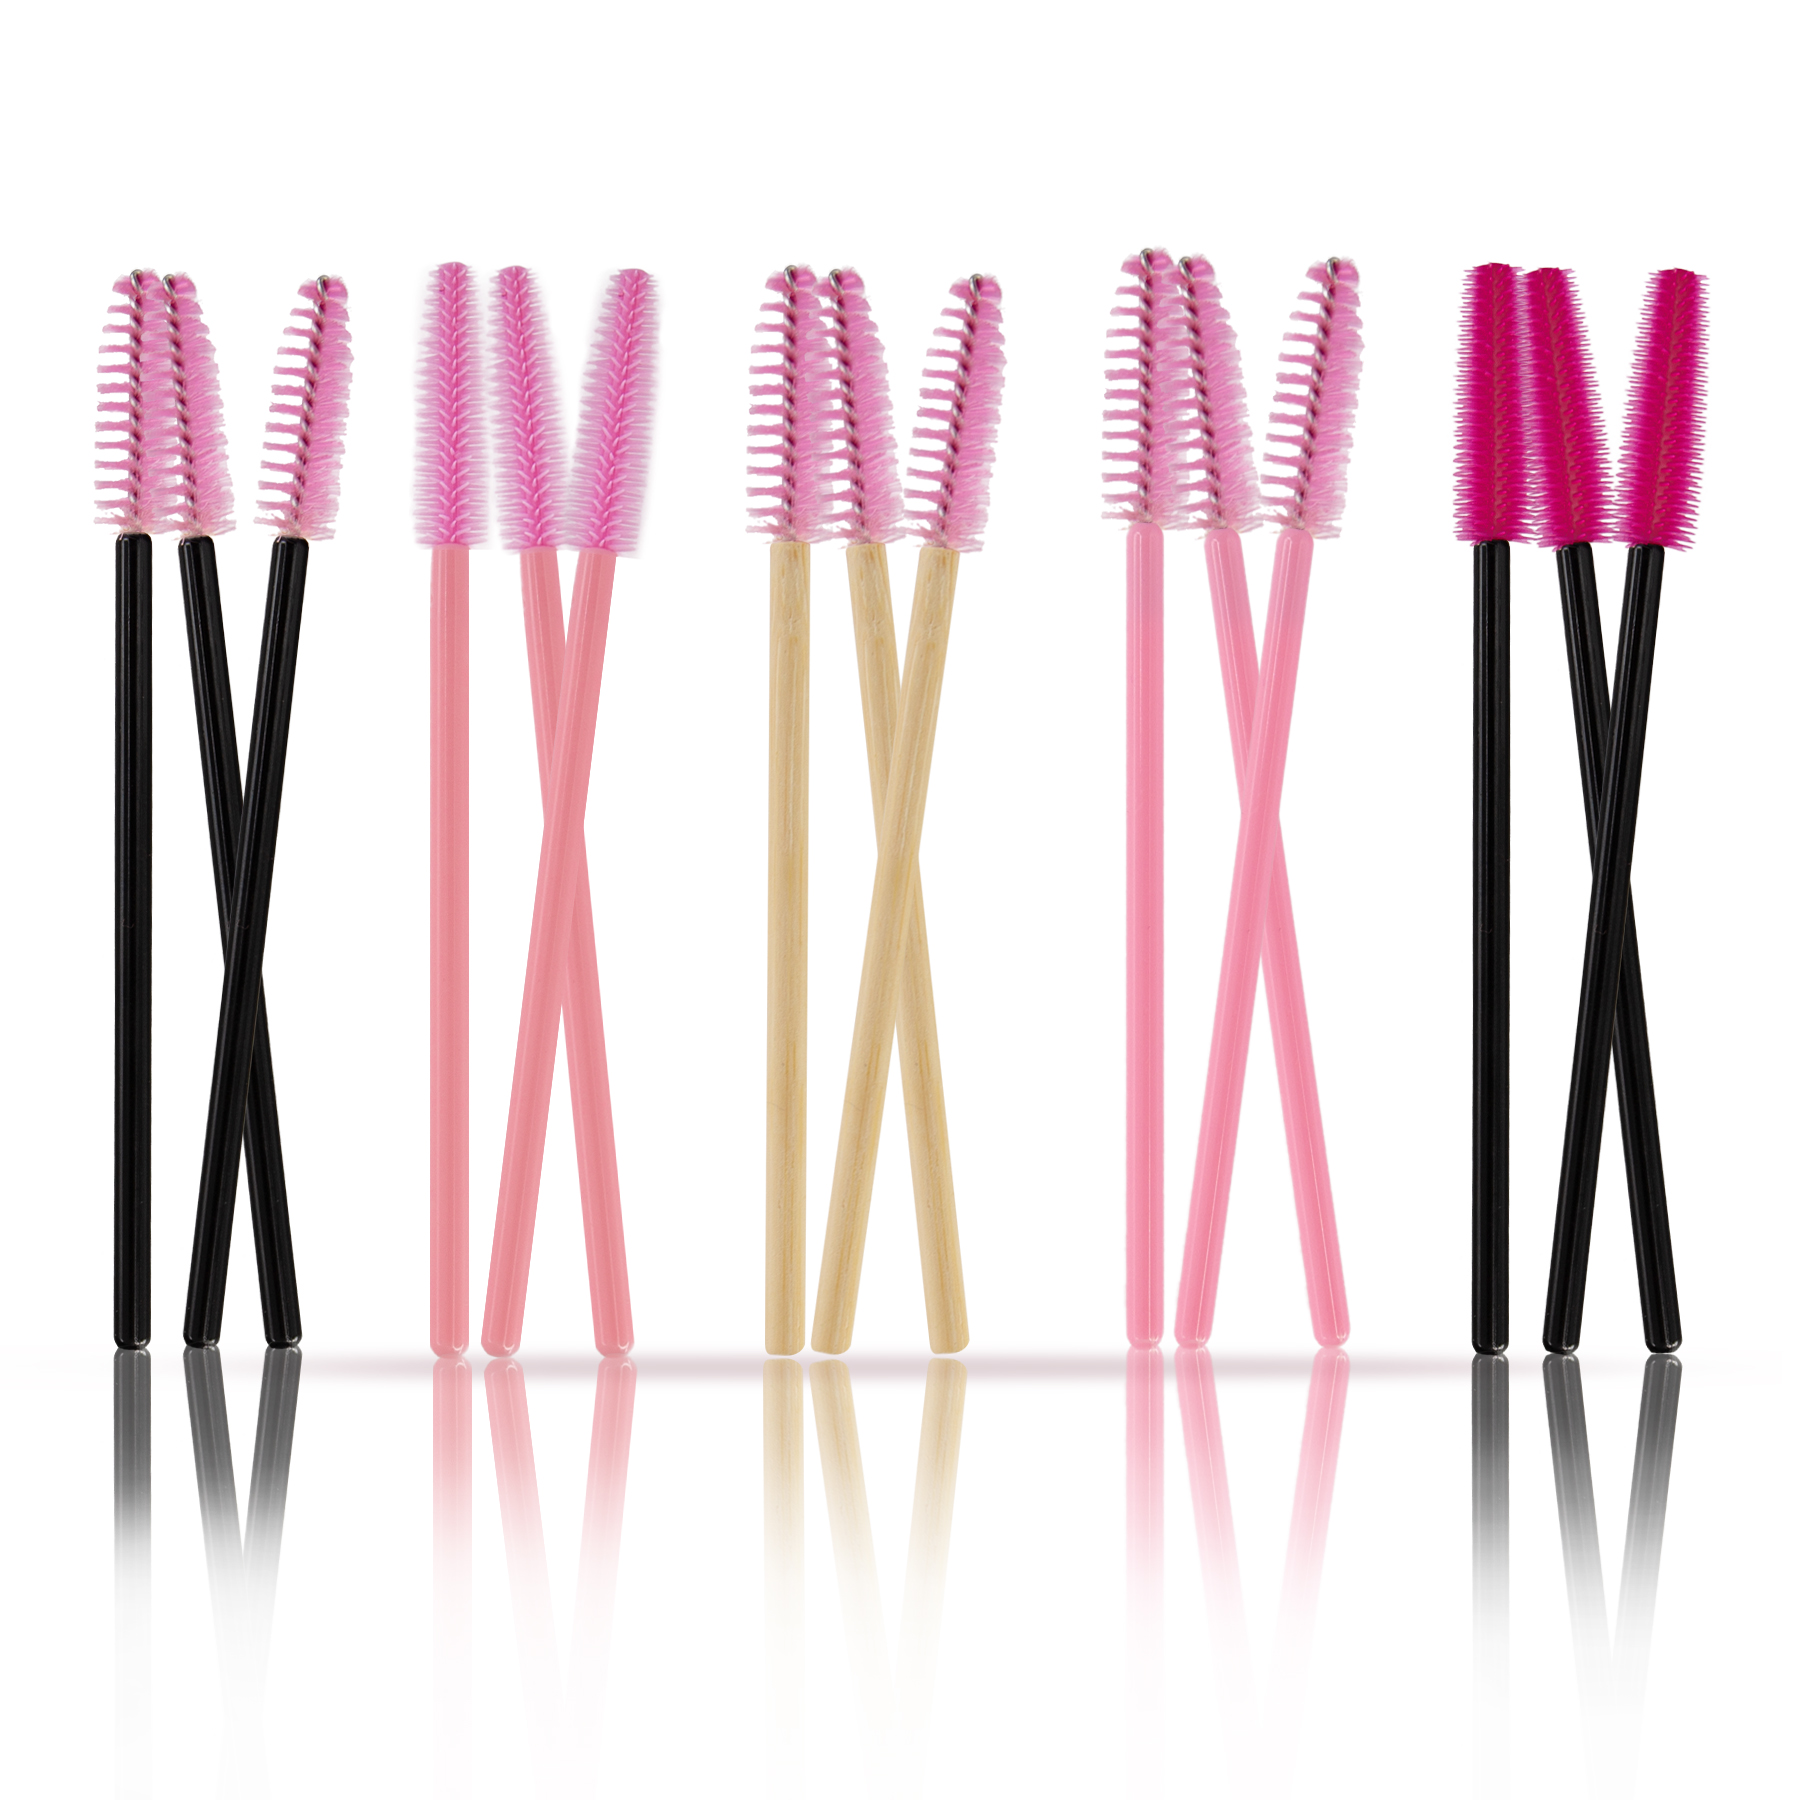 Mascara brushes | different types